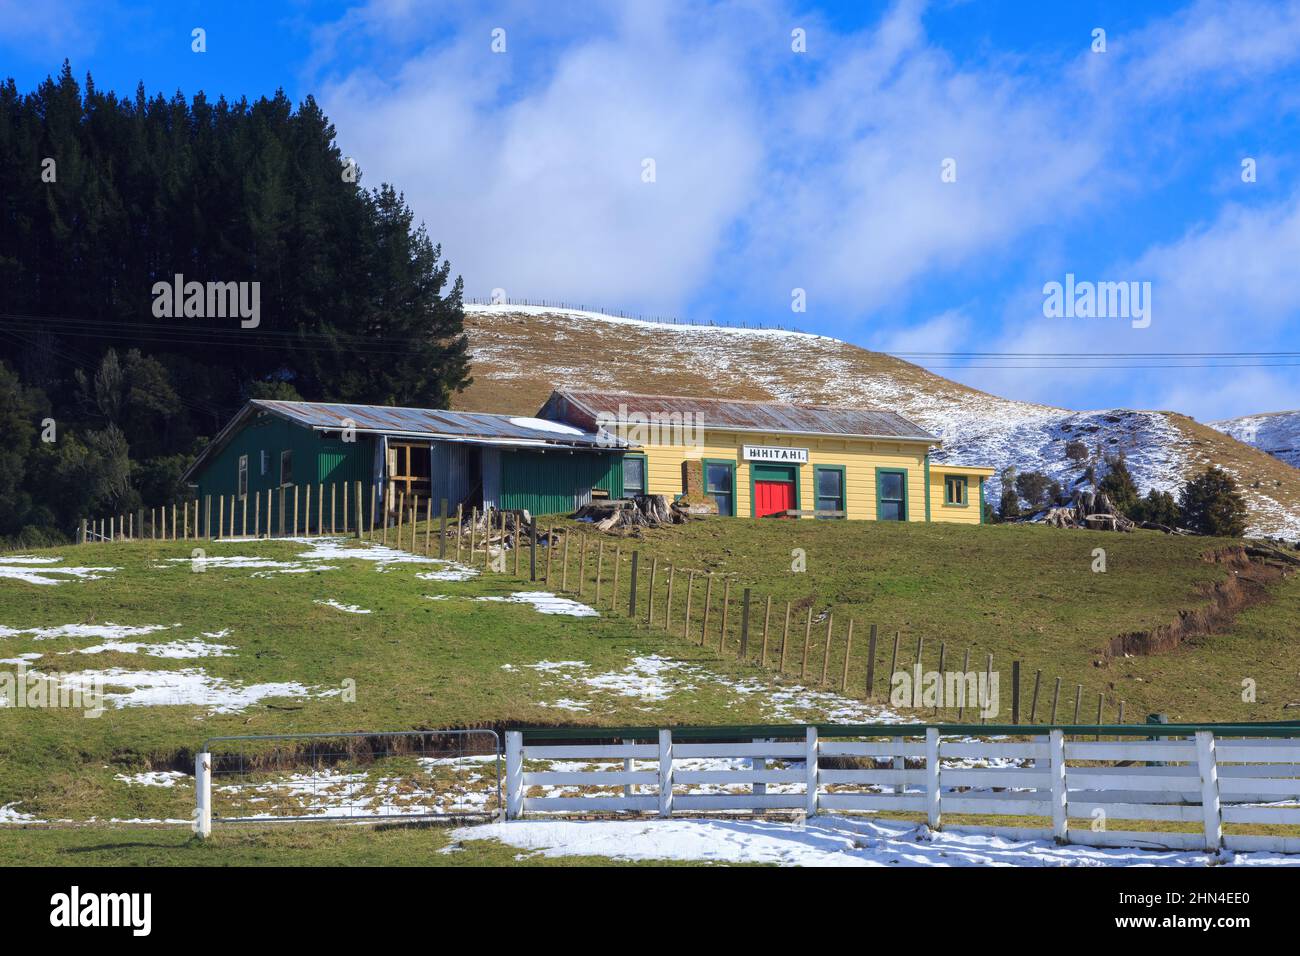 The old Hihitahi Railway Station, New Zealand, on a snowy winter's day Stock Photo